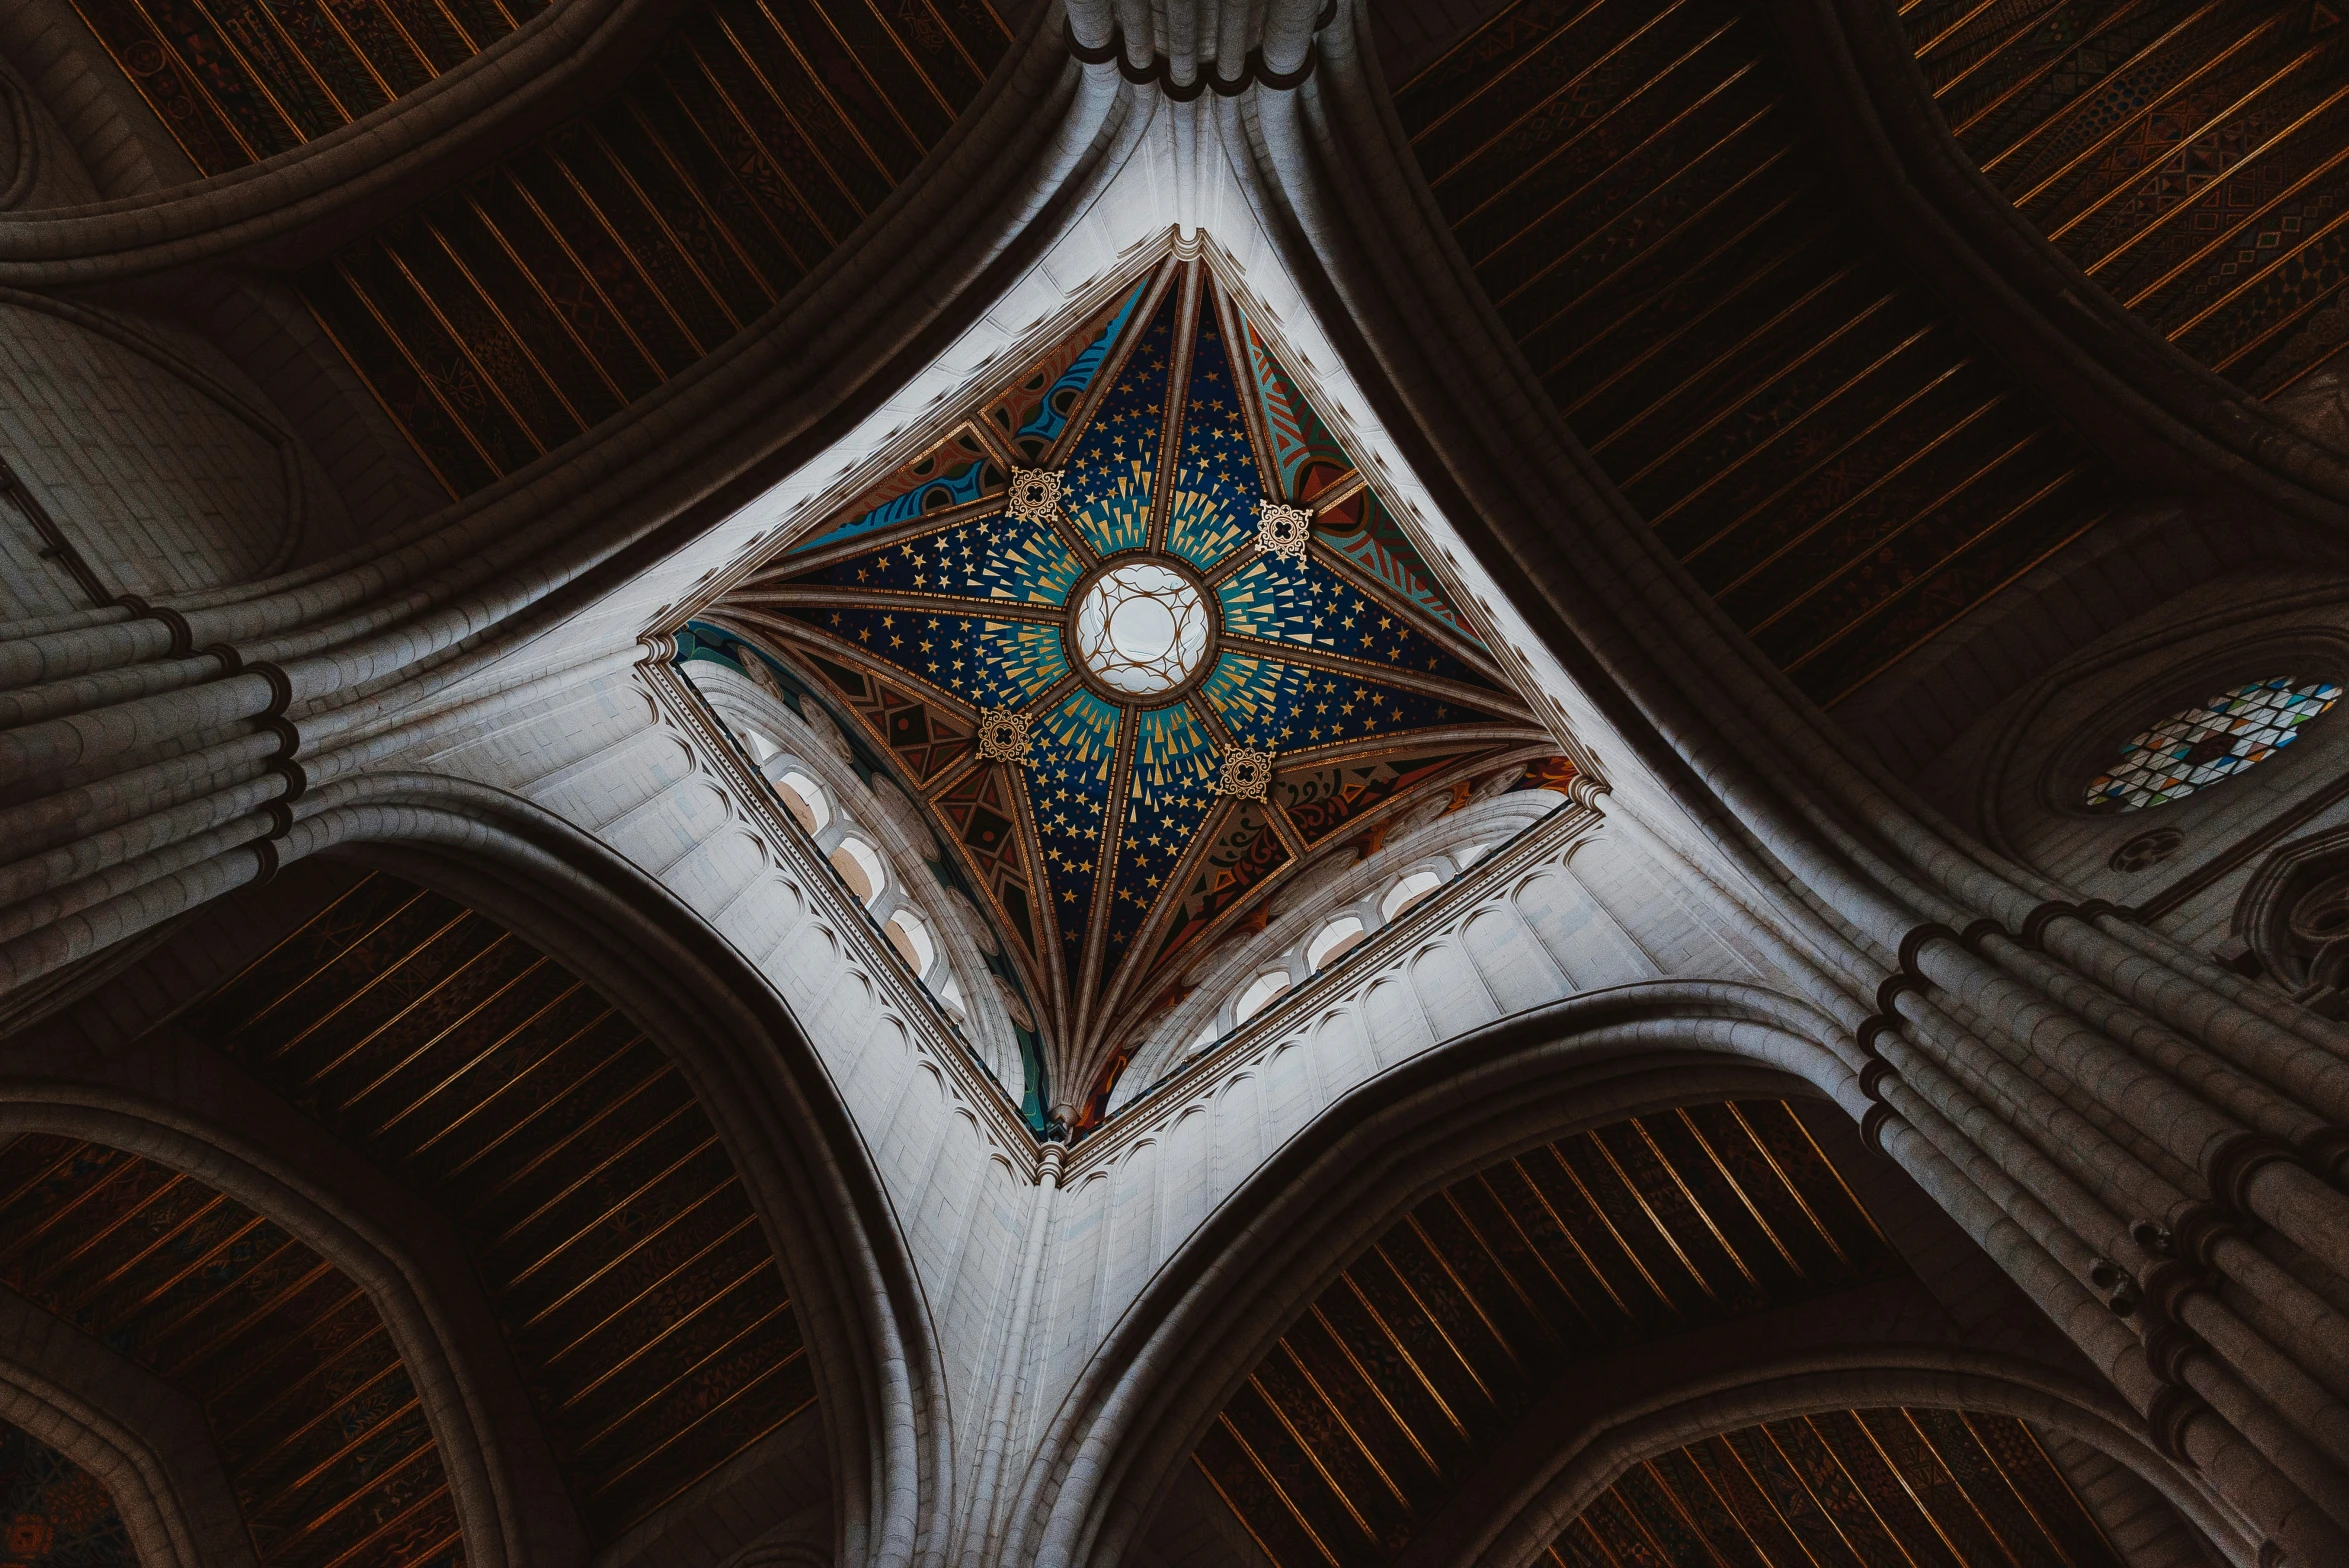 the ceiling of a cathedral is made up of intricate designs